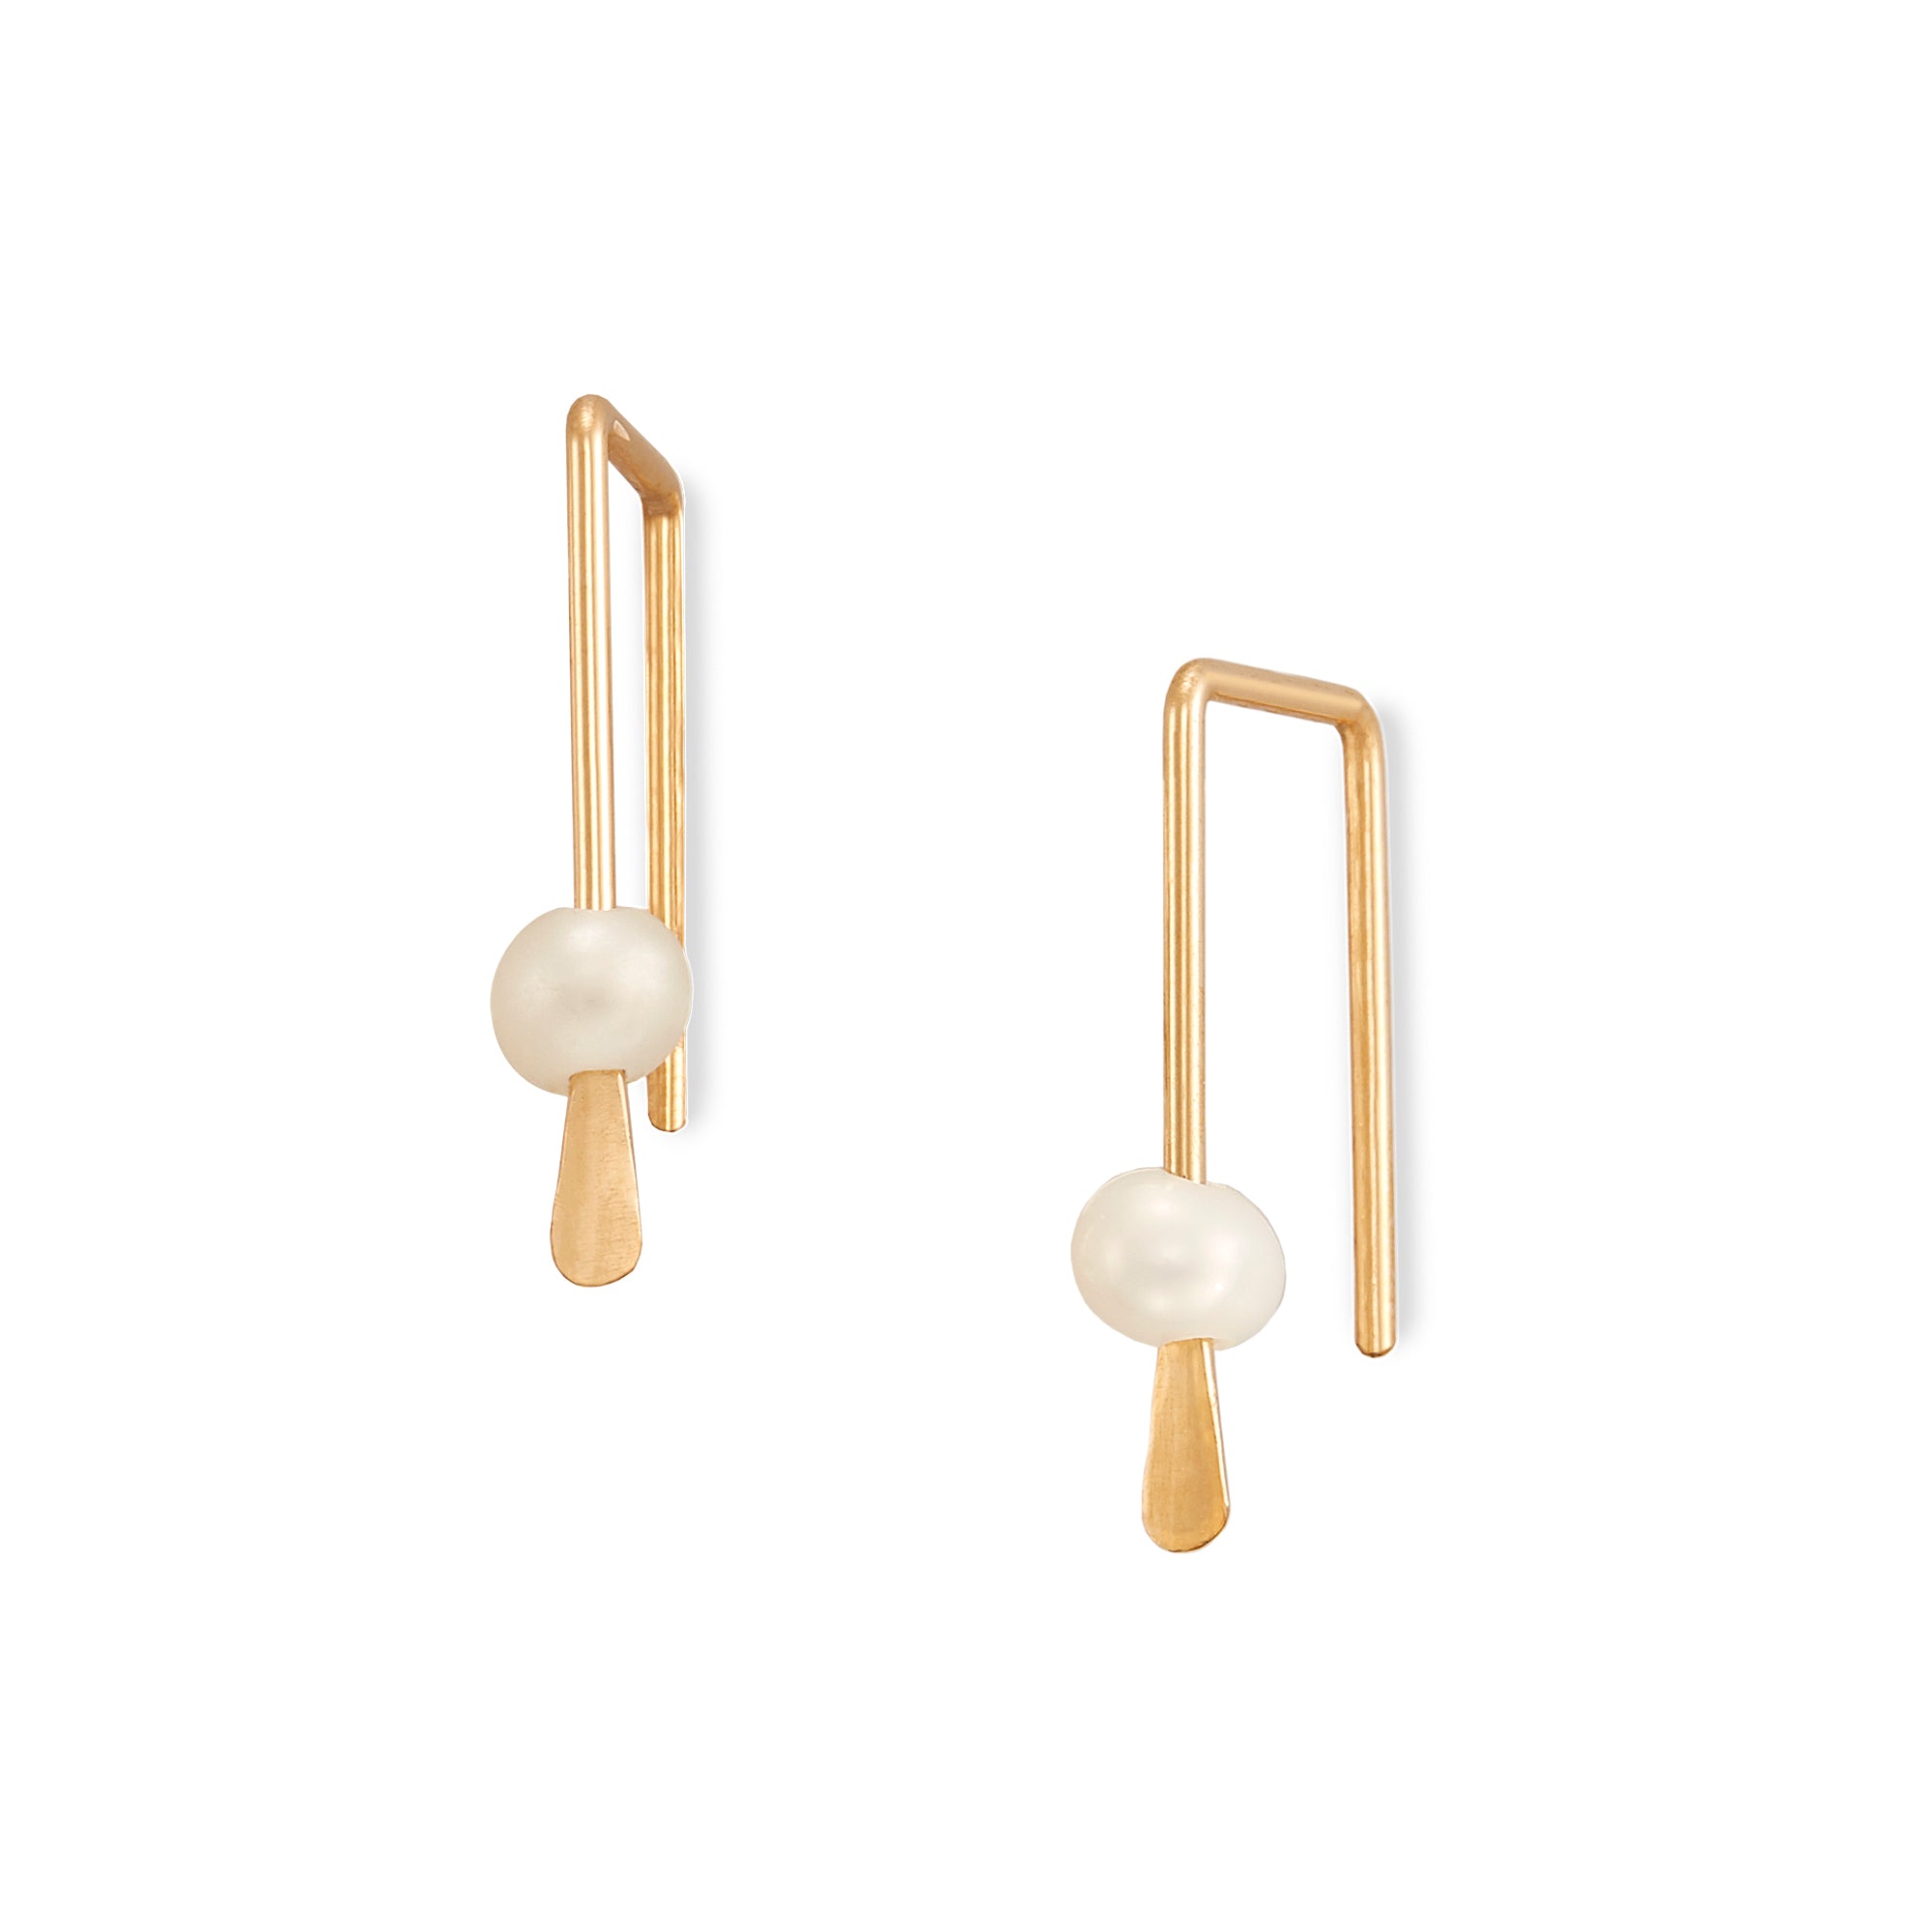 The Pearl Tiny Hook is a modern, geometric threader featuring a delicate seed pearl hugging your earlobe.